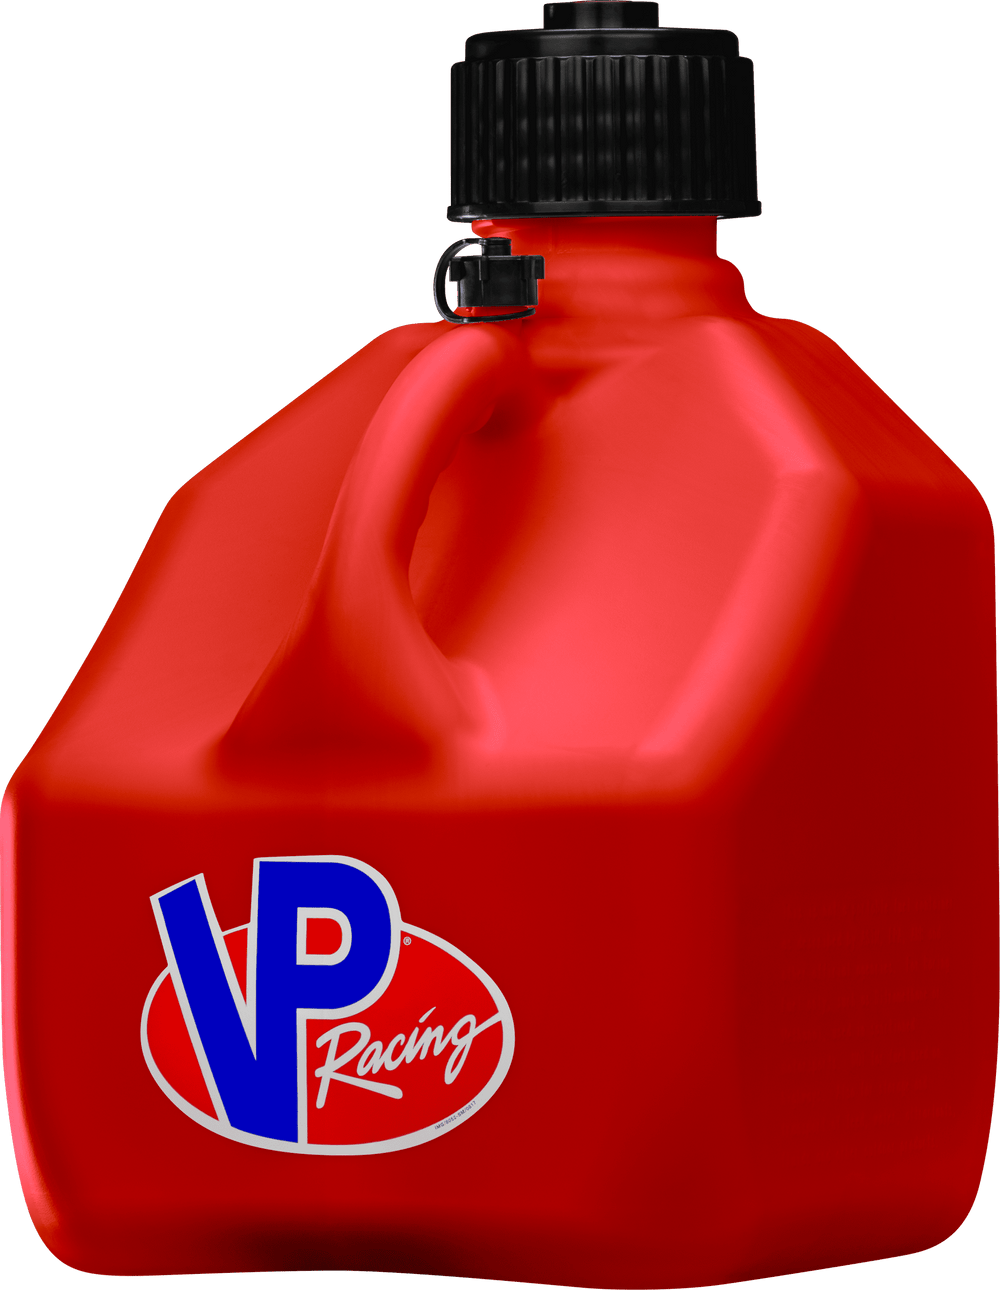 VP Racing 3-Gallon Motorsport - Set of 4 Containers - Red Jug, Black Cap - Dirty Racing Products